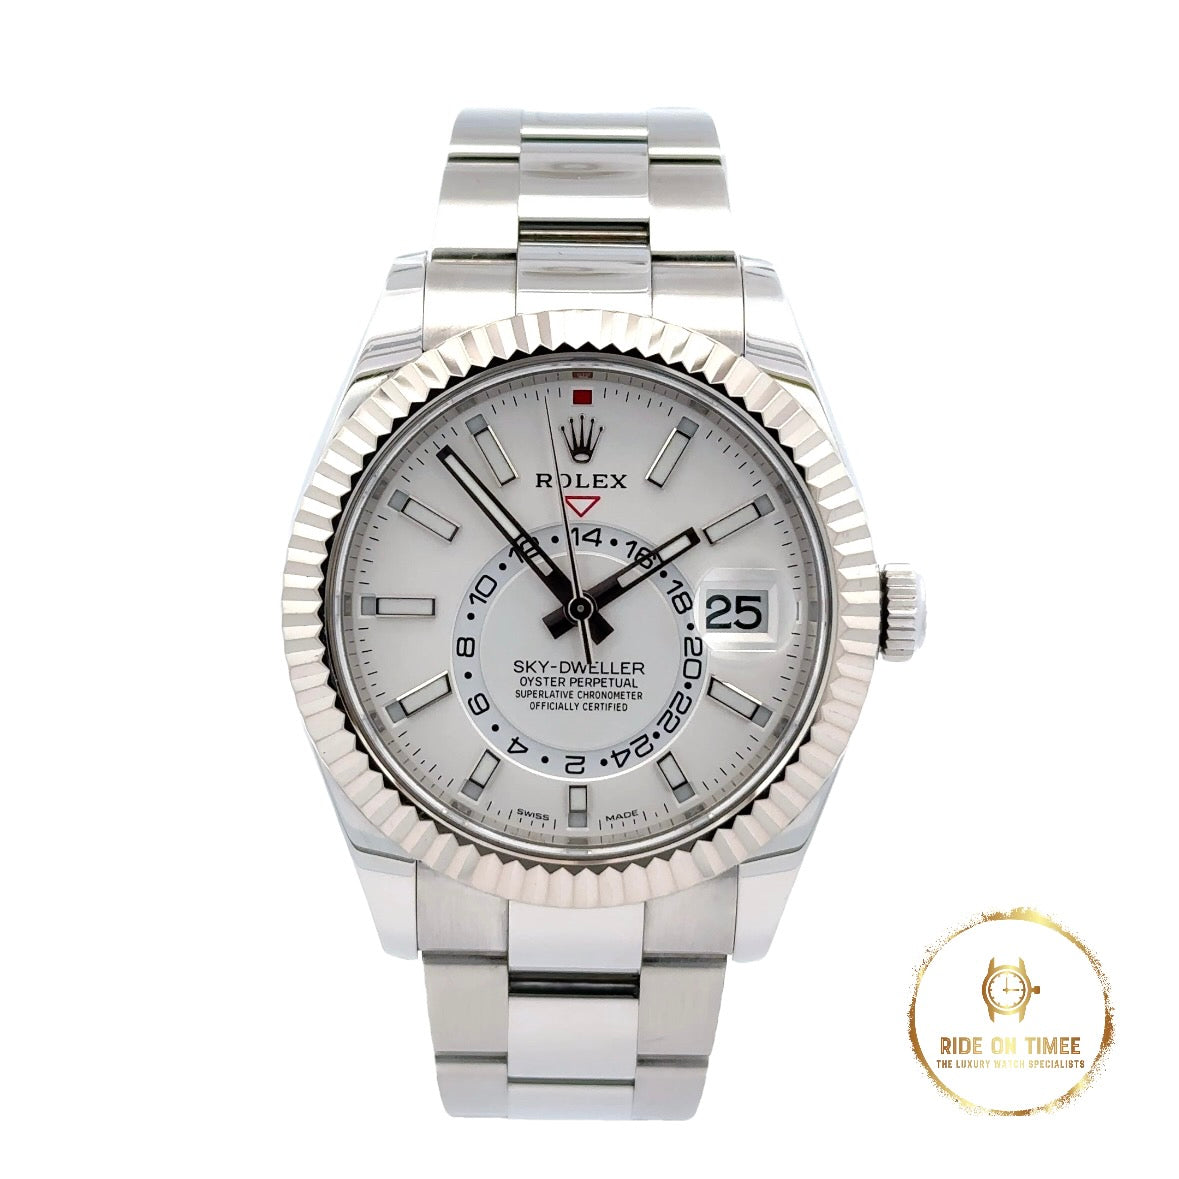 Rolex Sky-Dweller White Dial ‘326934’ - Ride On Timee